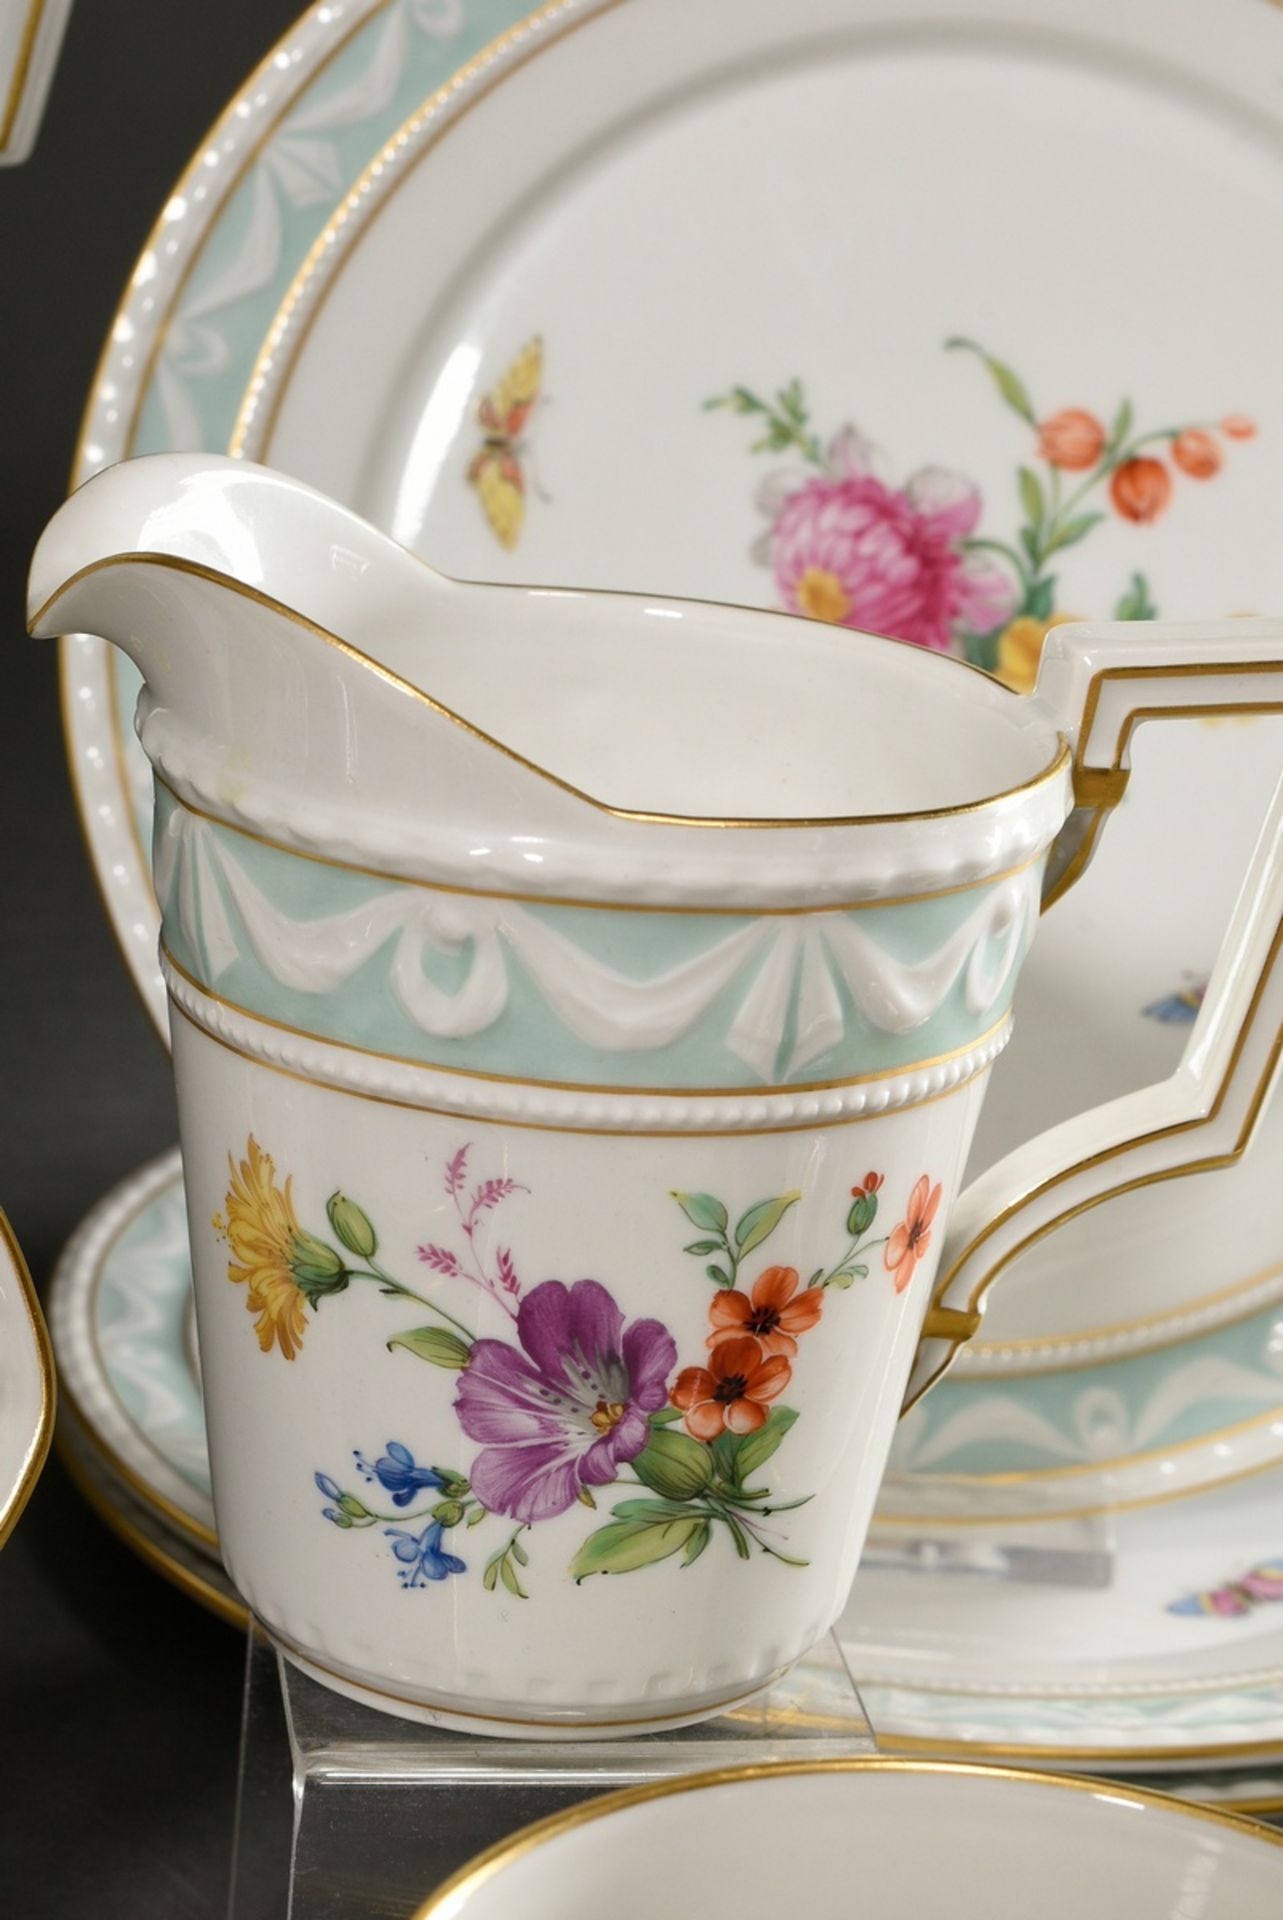 15 Pieces KPM coffee service "Kurland" with flowers and insects, gold staffage and turquoise frieze - Image 5 of 10